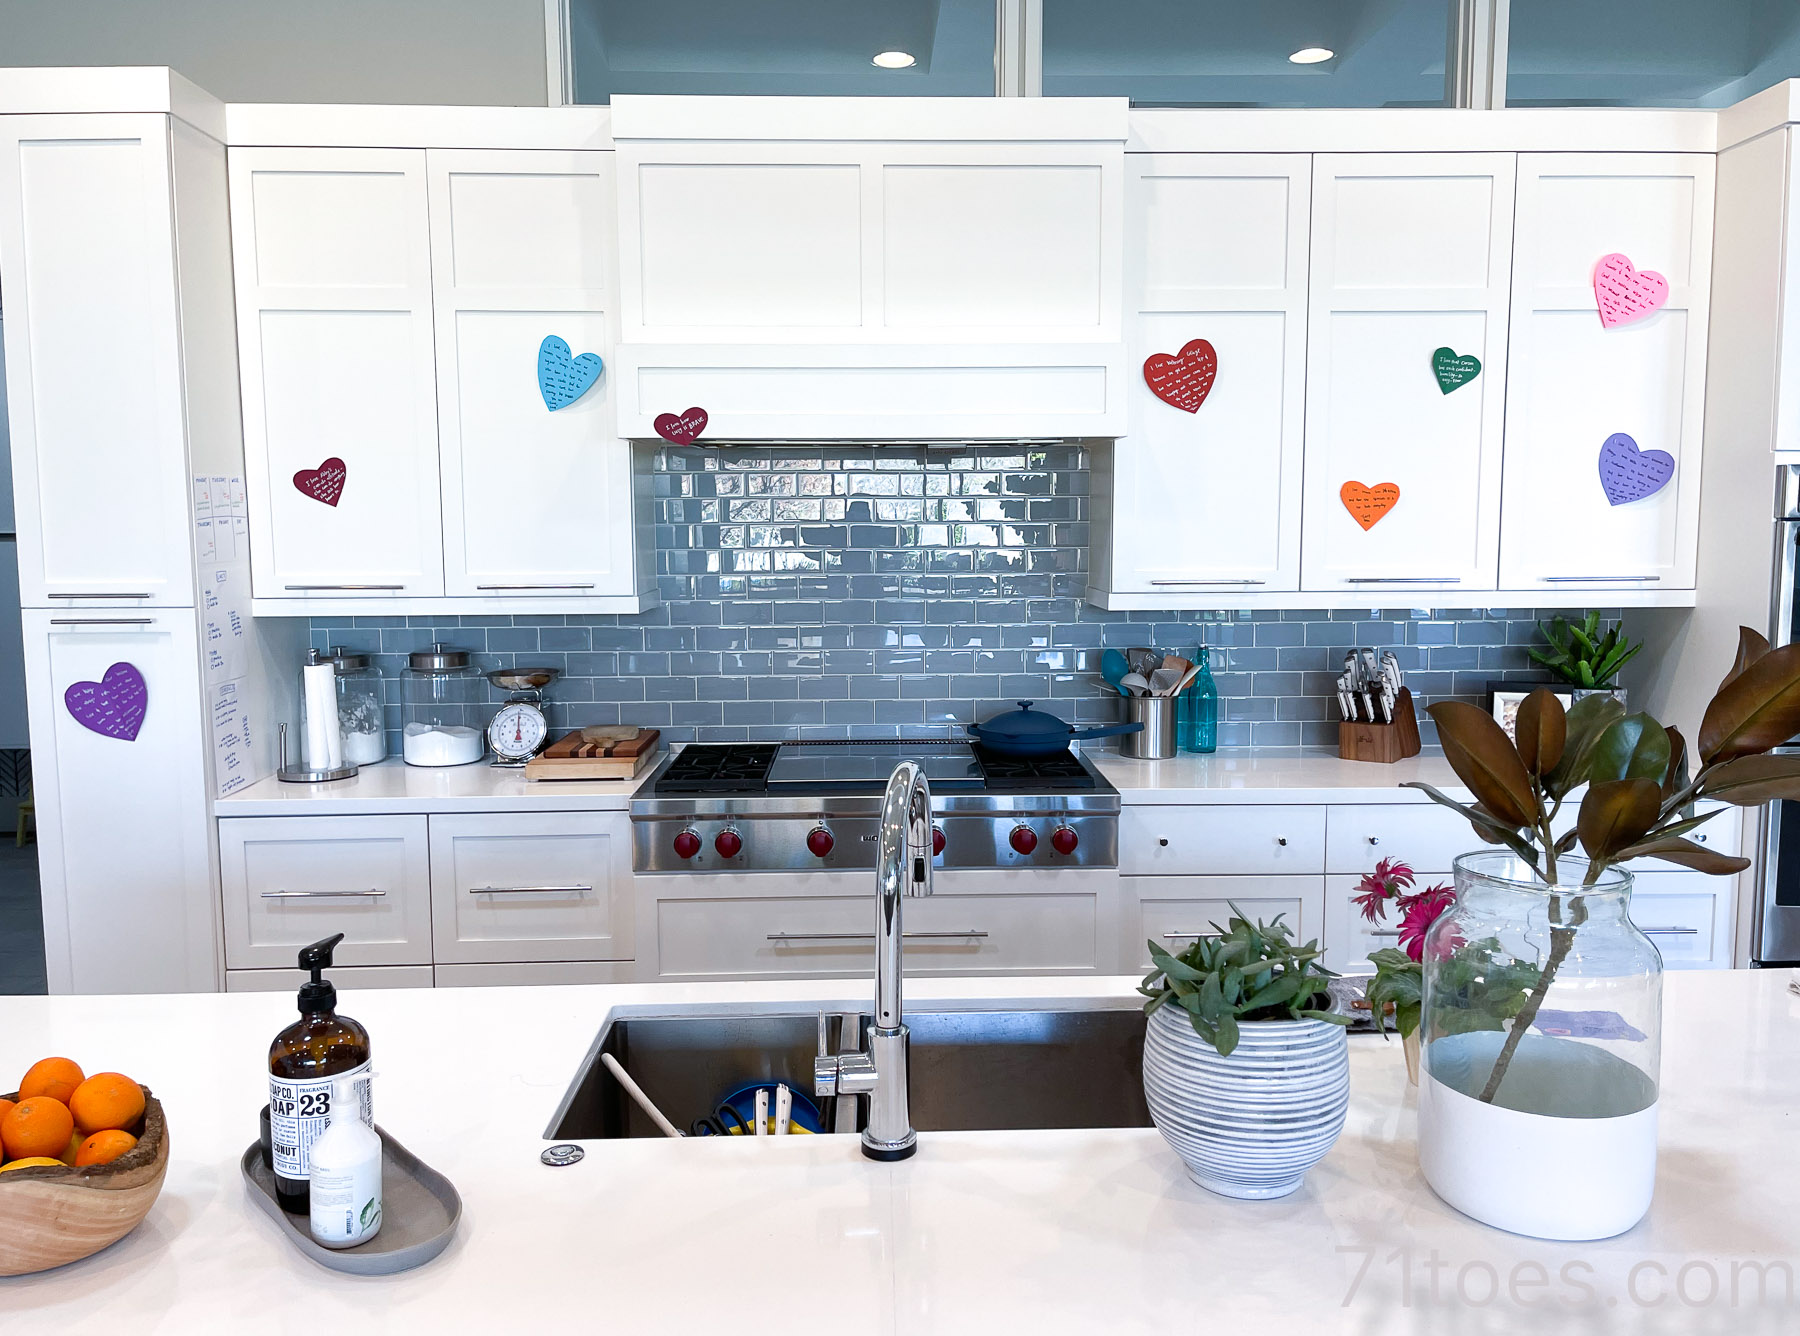 adding our traditional Valentine’s love to the kitchen